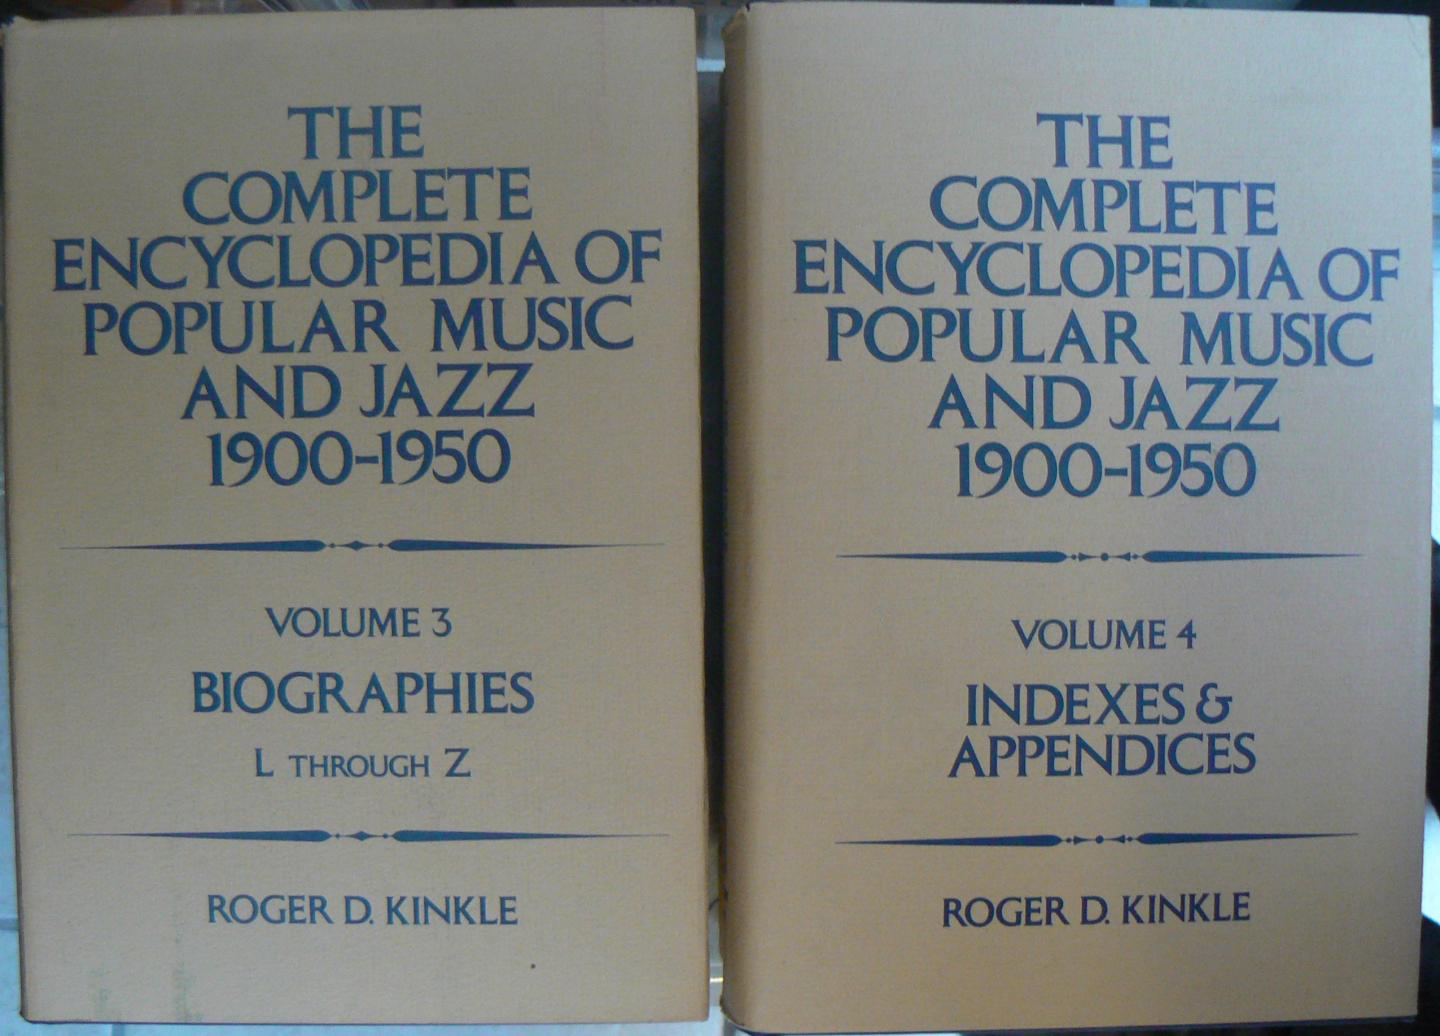 Kinkle, Roger D. - The Complete Encyclopedia of Popular Music and Jazz 1900-1950